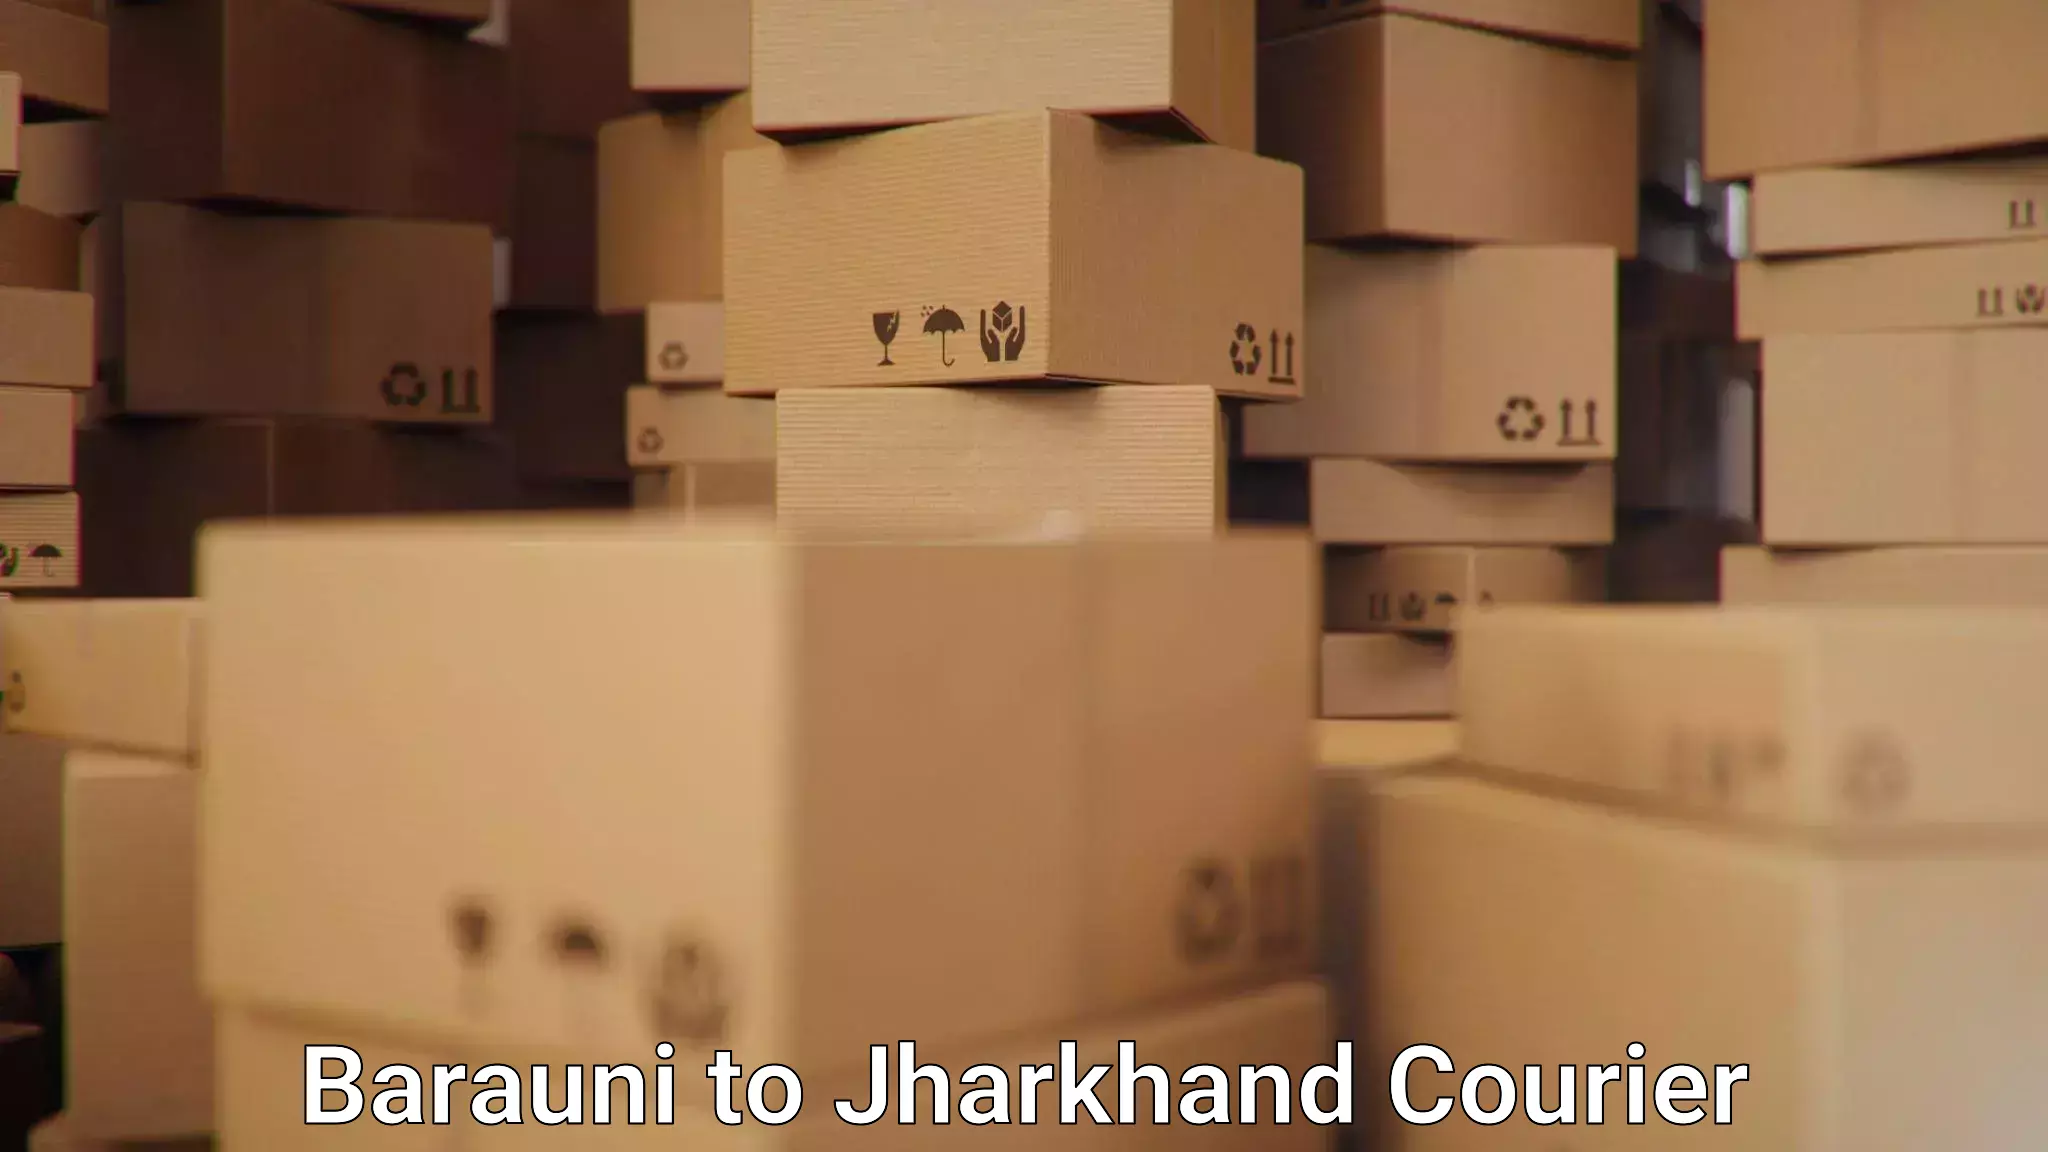 Fragile item shipping in Barauni to Jharkhand